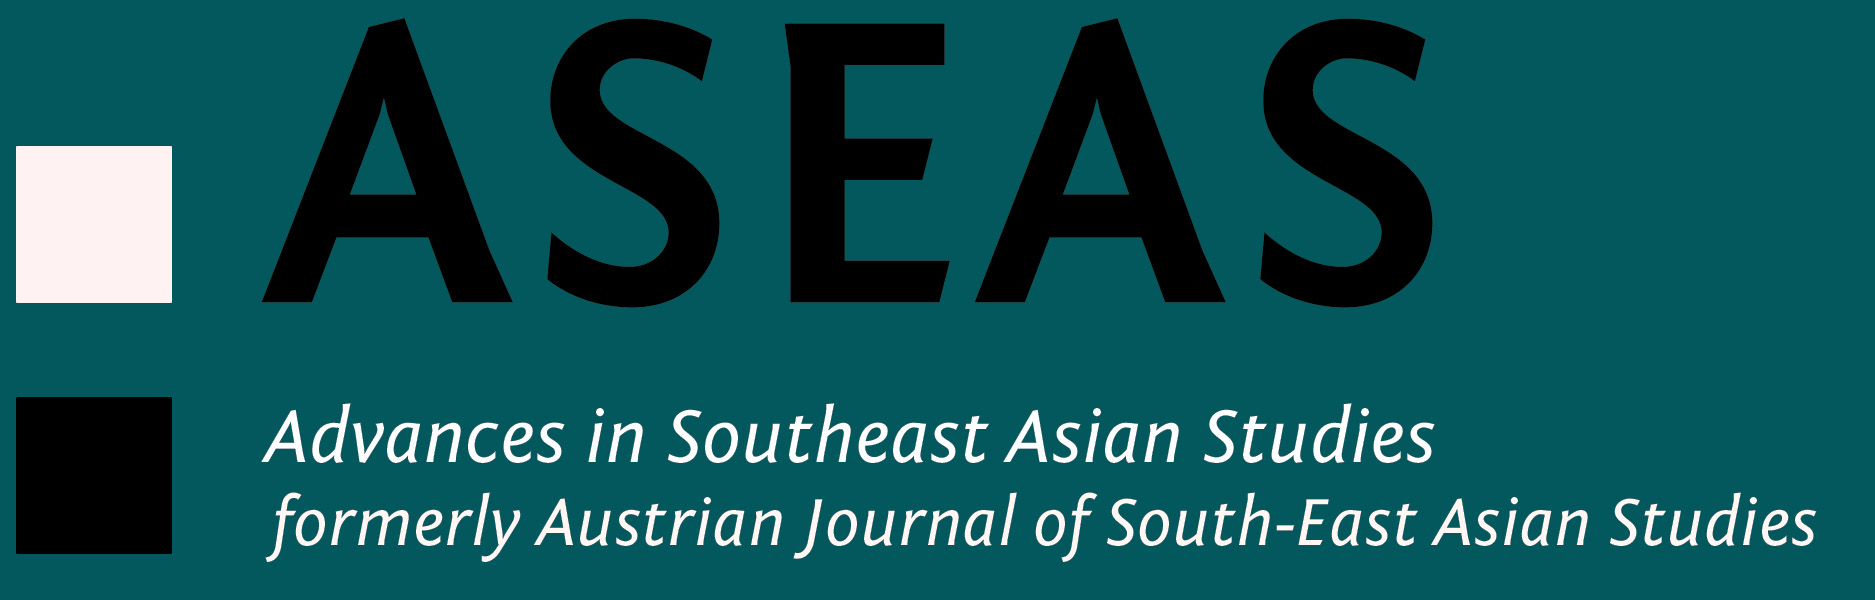 Advances in Southeast Asian Studies (formerly Austrian Journal of South-East Asian Studies)